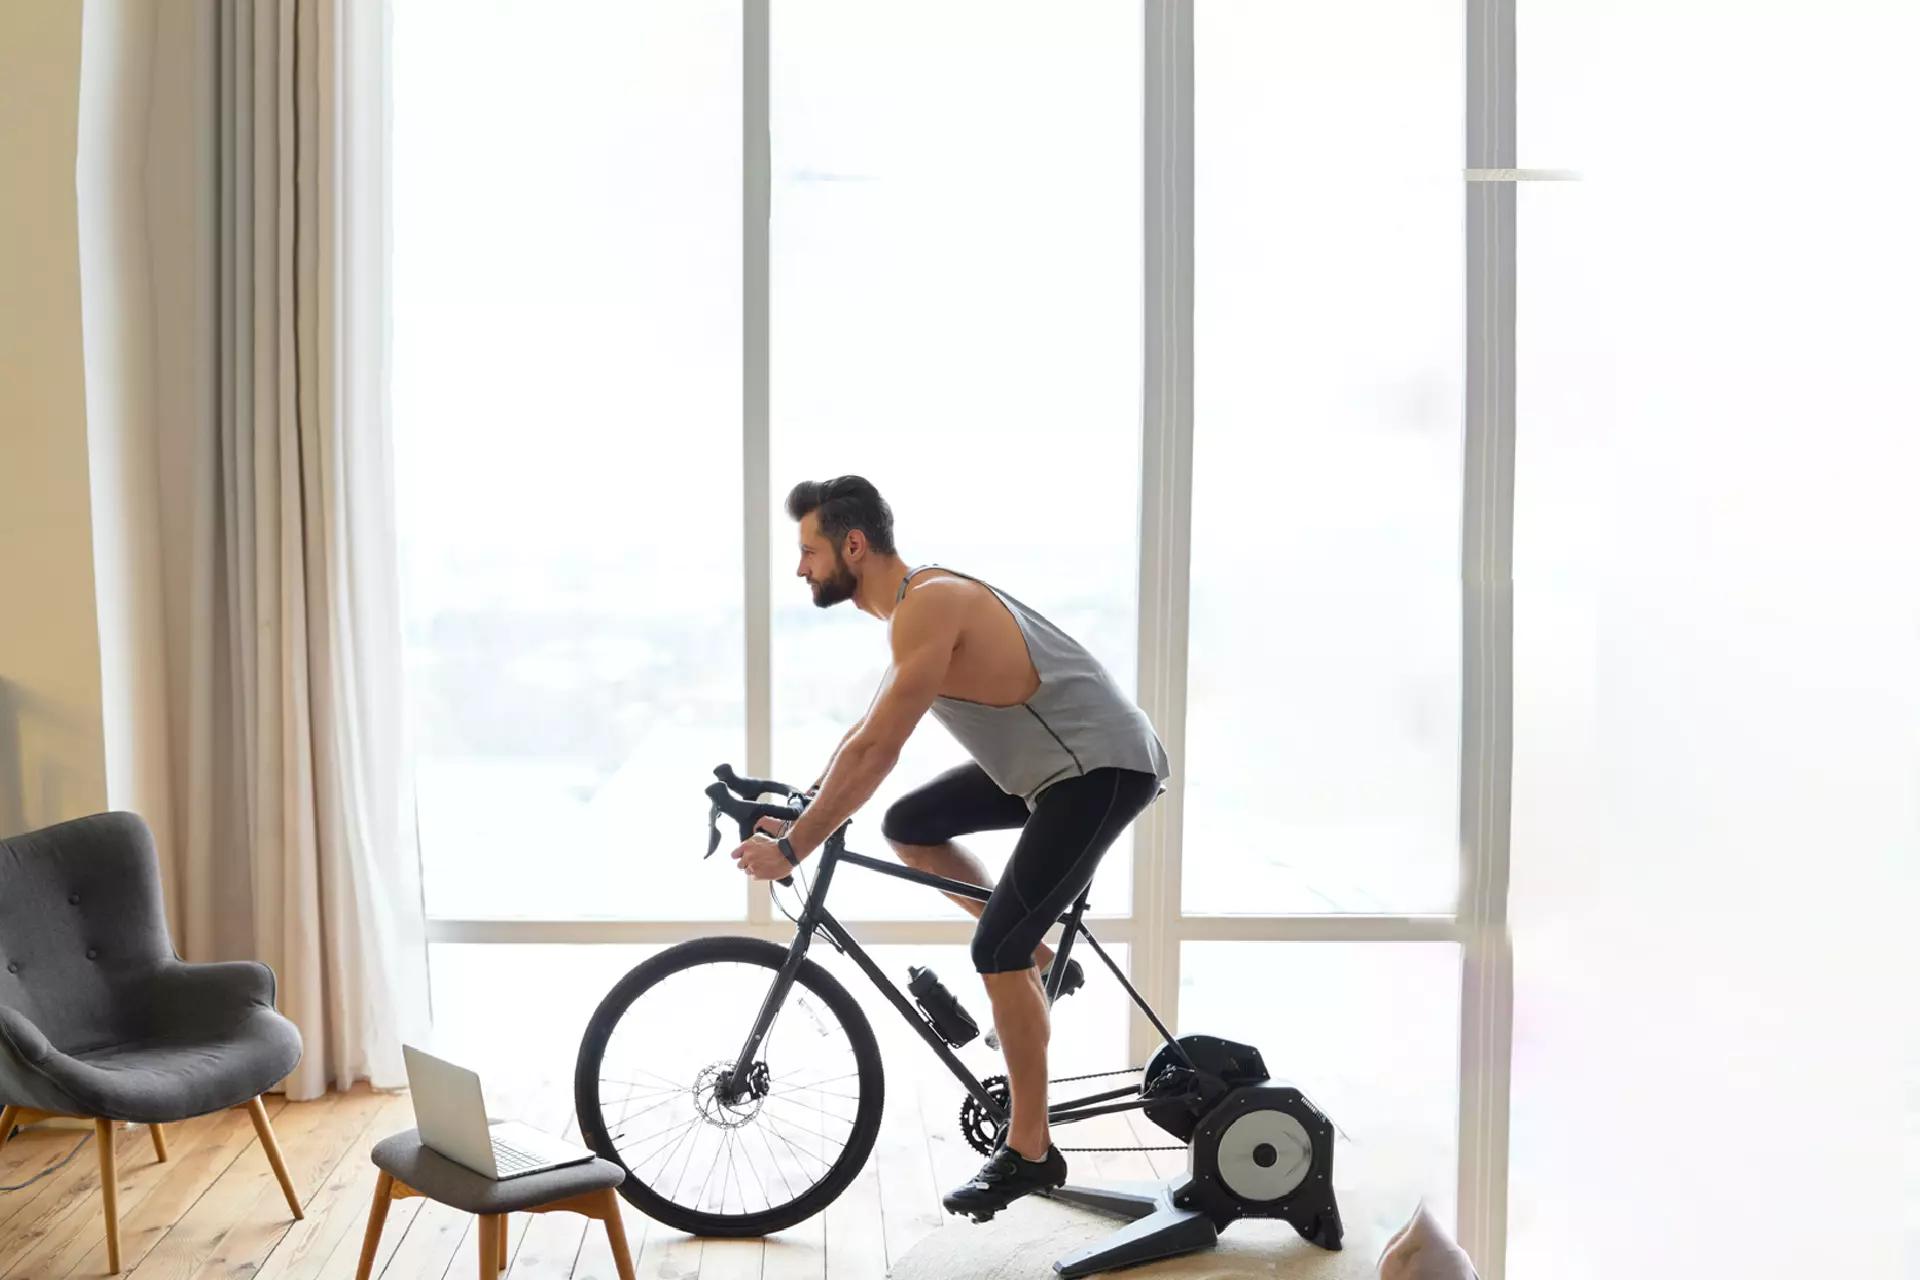 Home Exercise Equipment: Pros, Cons, and How to Set Them Up